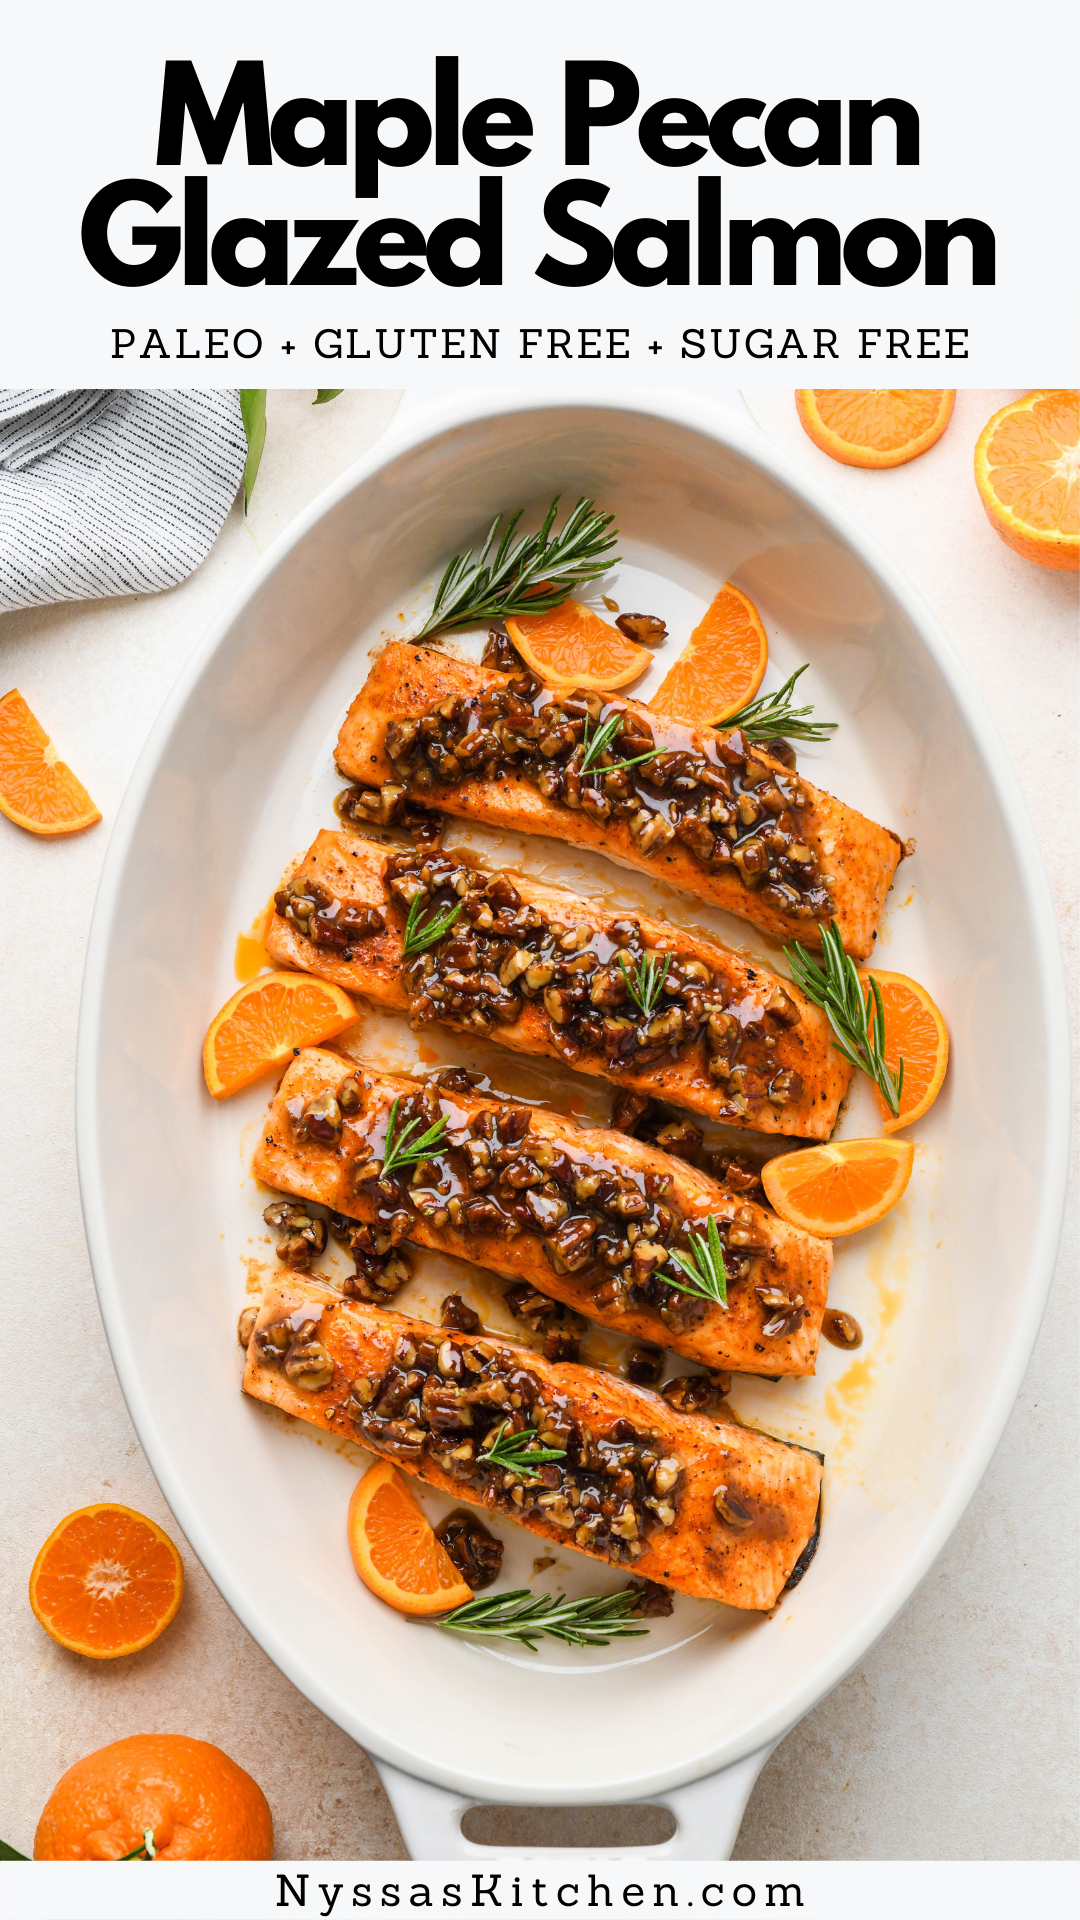 You are going to love this delightful maple pecan glazed salmon! Oven baked and well seasoned, this elegant salmon dish is impressive but easy to make. Made with healthy whole food ingredients that come together to create the most delicious meal with the best homemade maple glaze. Perfect for the holidays or for date night in! Gluten free, refined sugar free, dairy free option, and paleo.